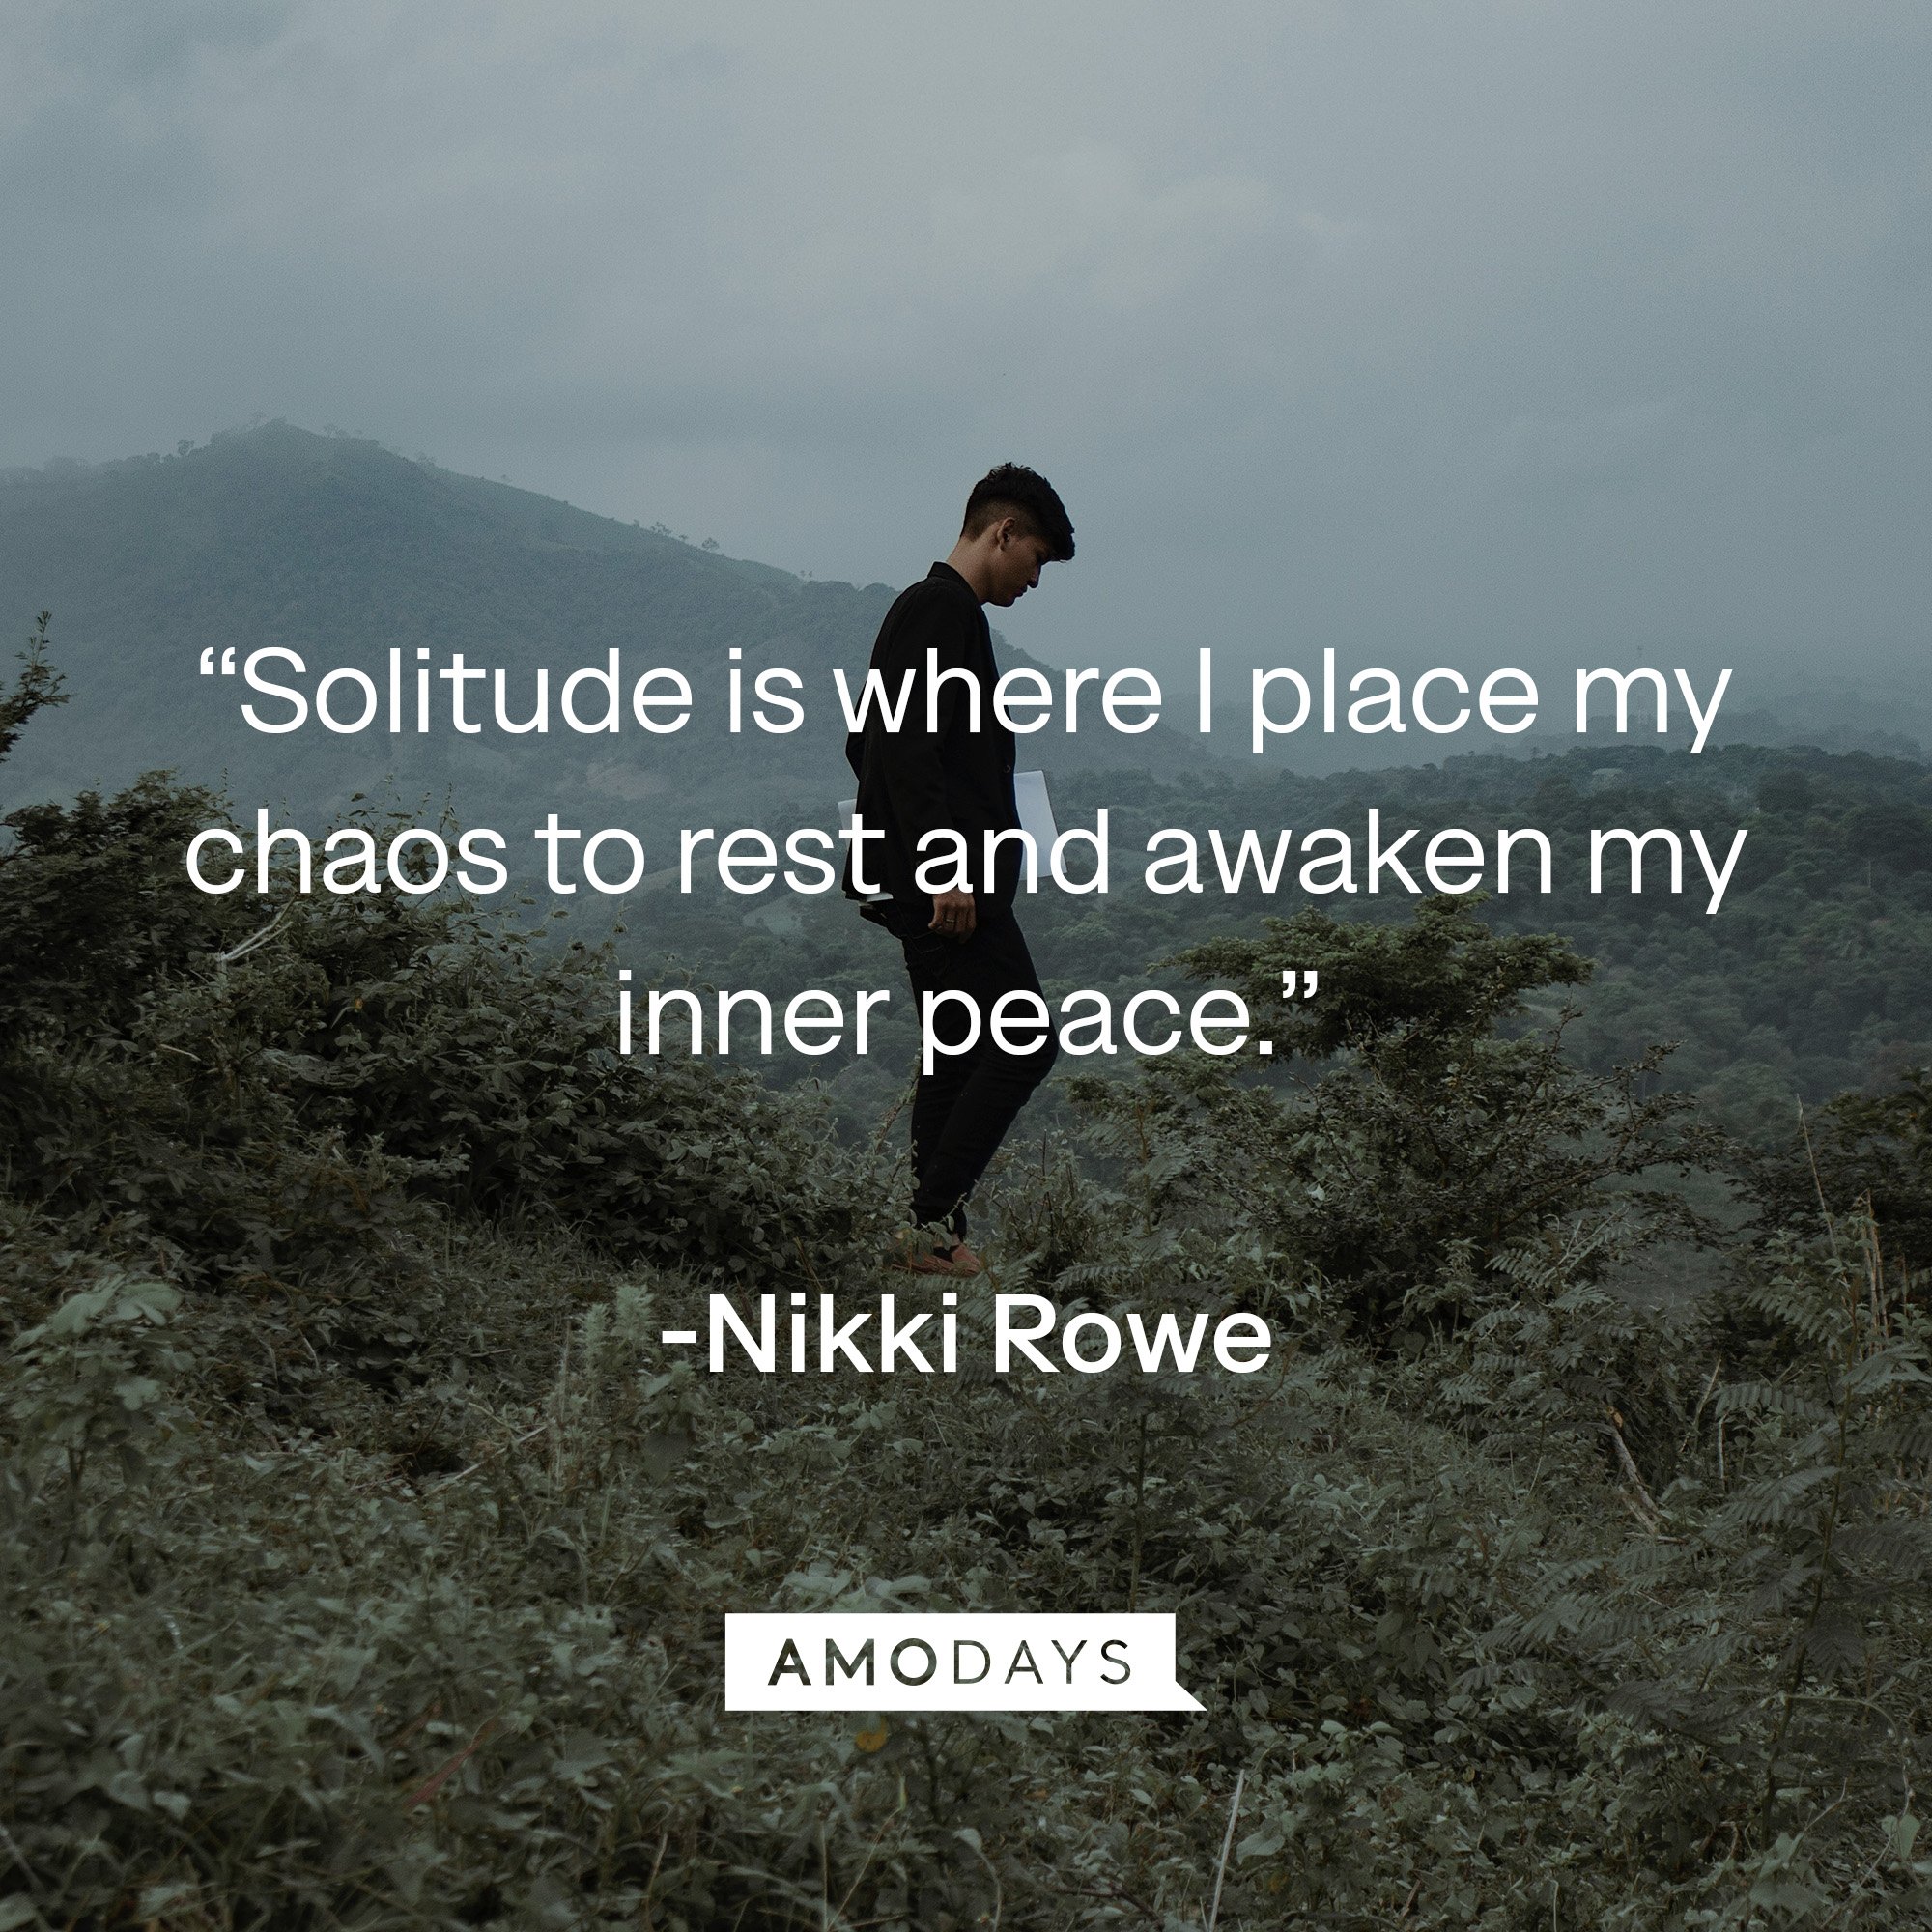 Nikki Rowe’s quote:“Solitude is where I place my chaos to rest and awaken my inner peace.” | Image: Amodays